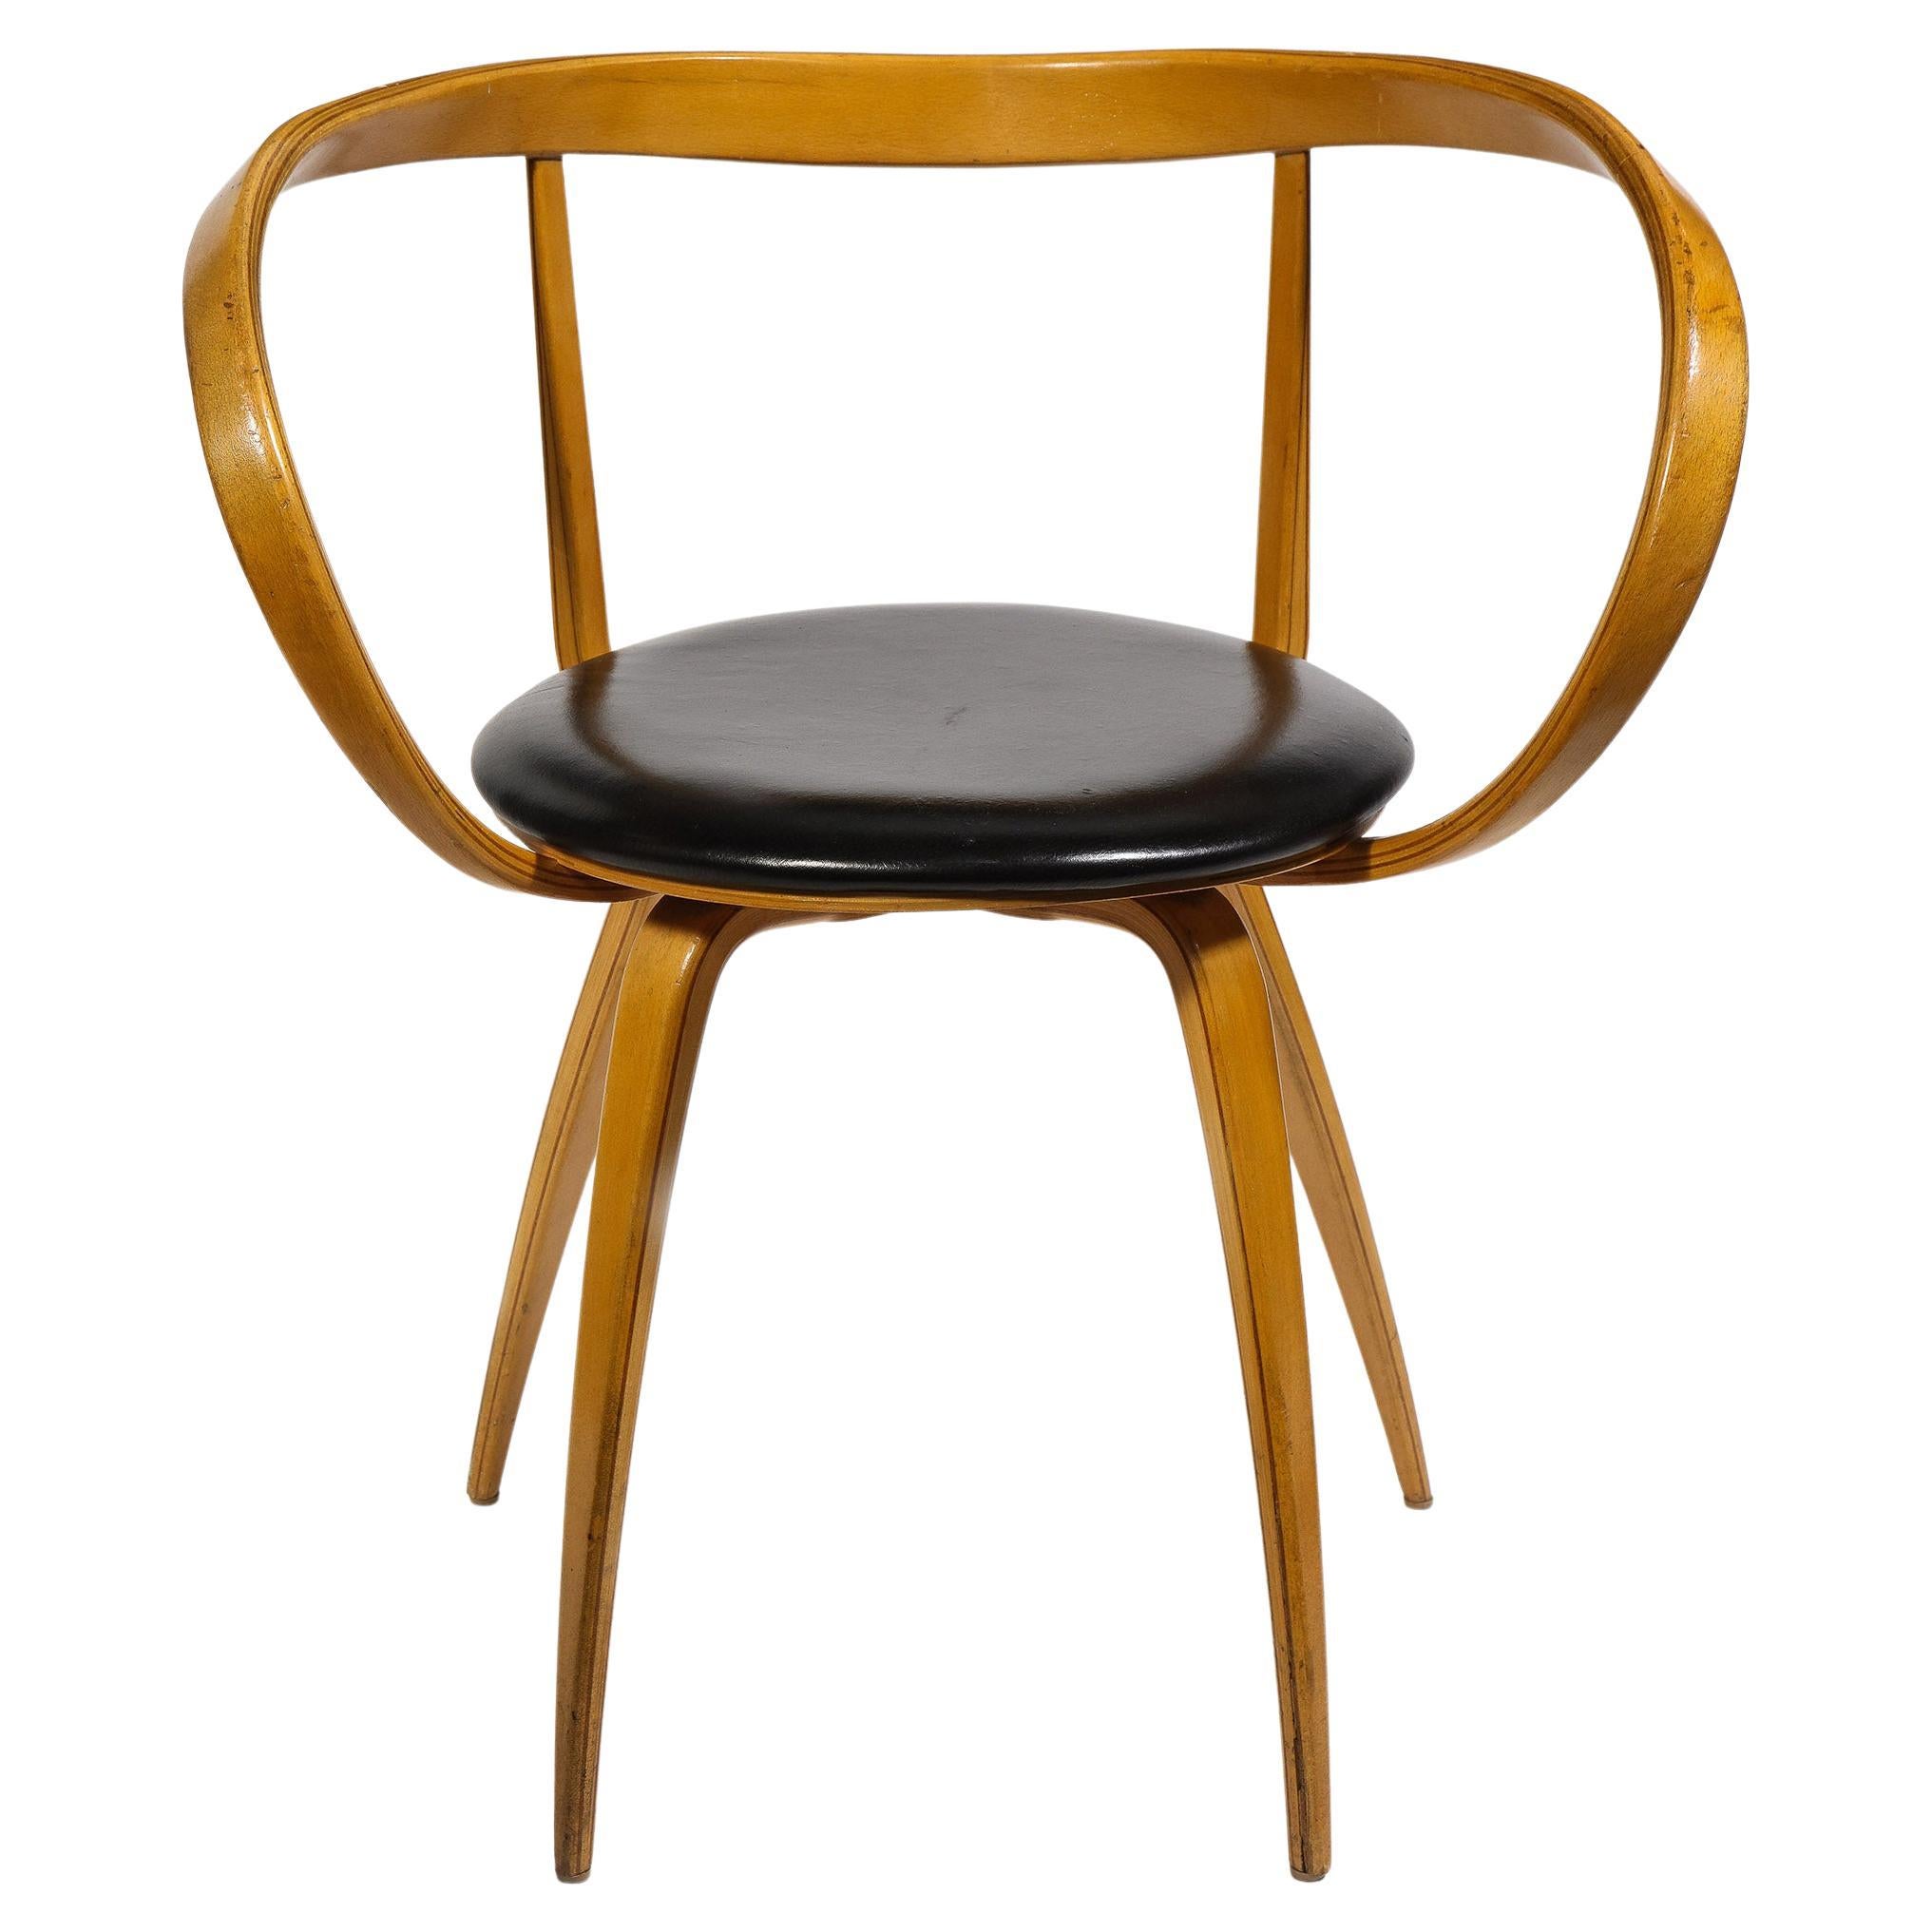 "Pretzel Chair" by George Nelson for Herman Miller